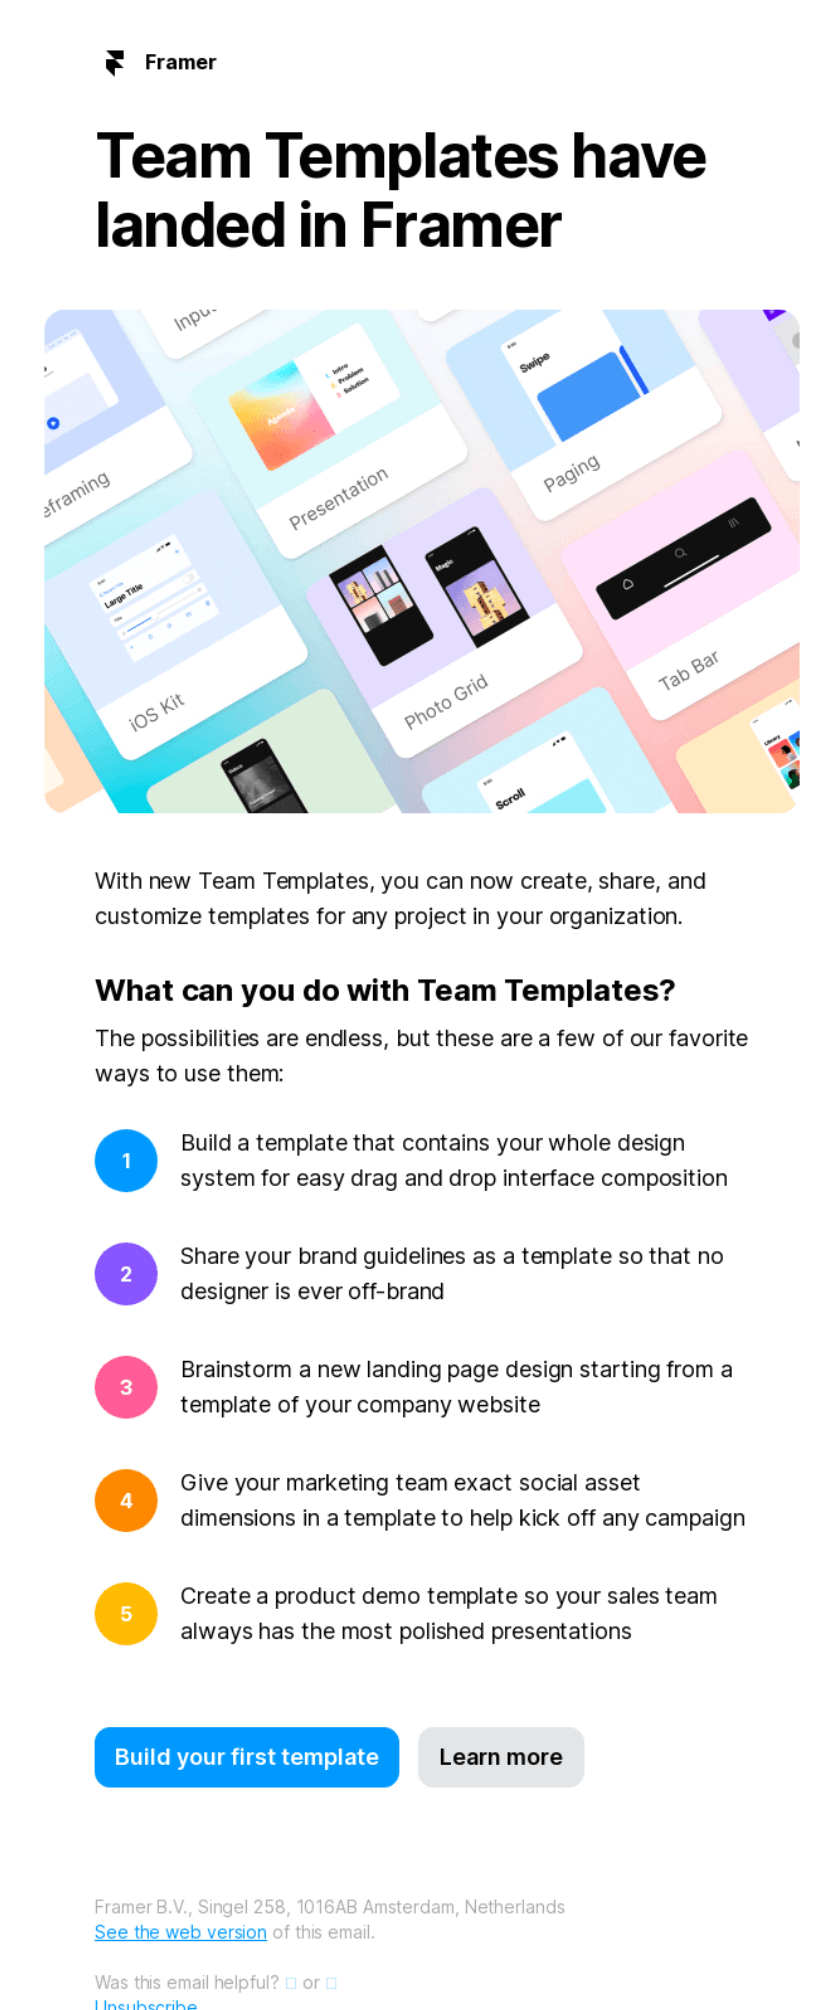 Framer announces the launch of Team Templates in an email